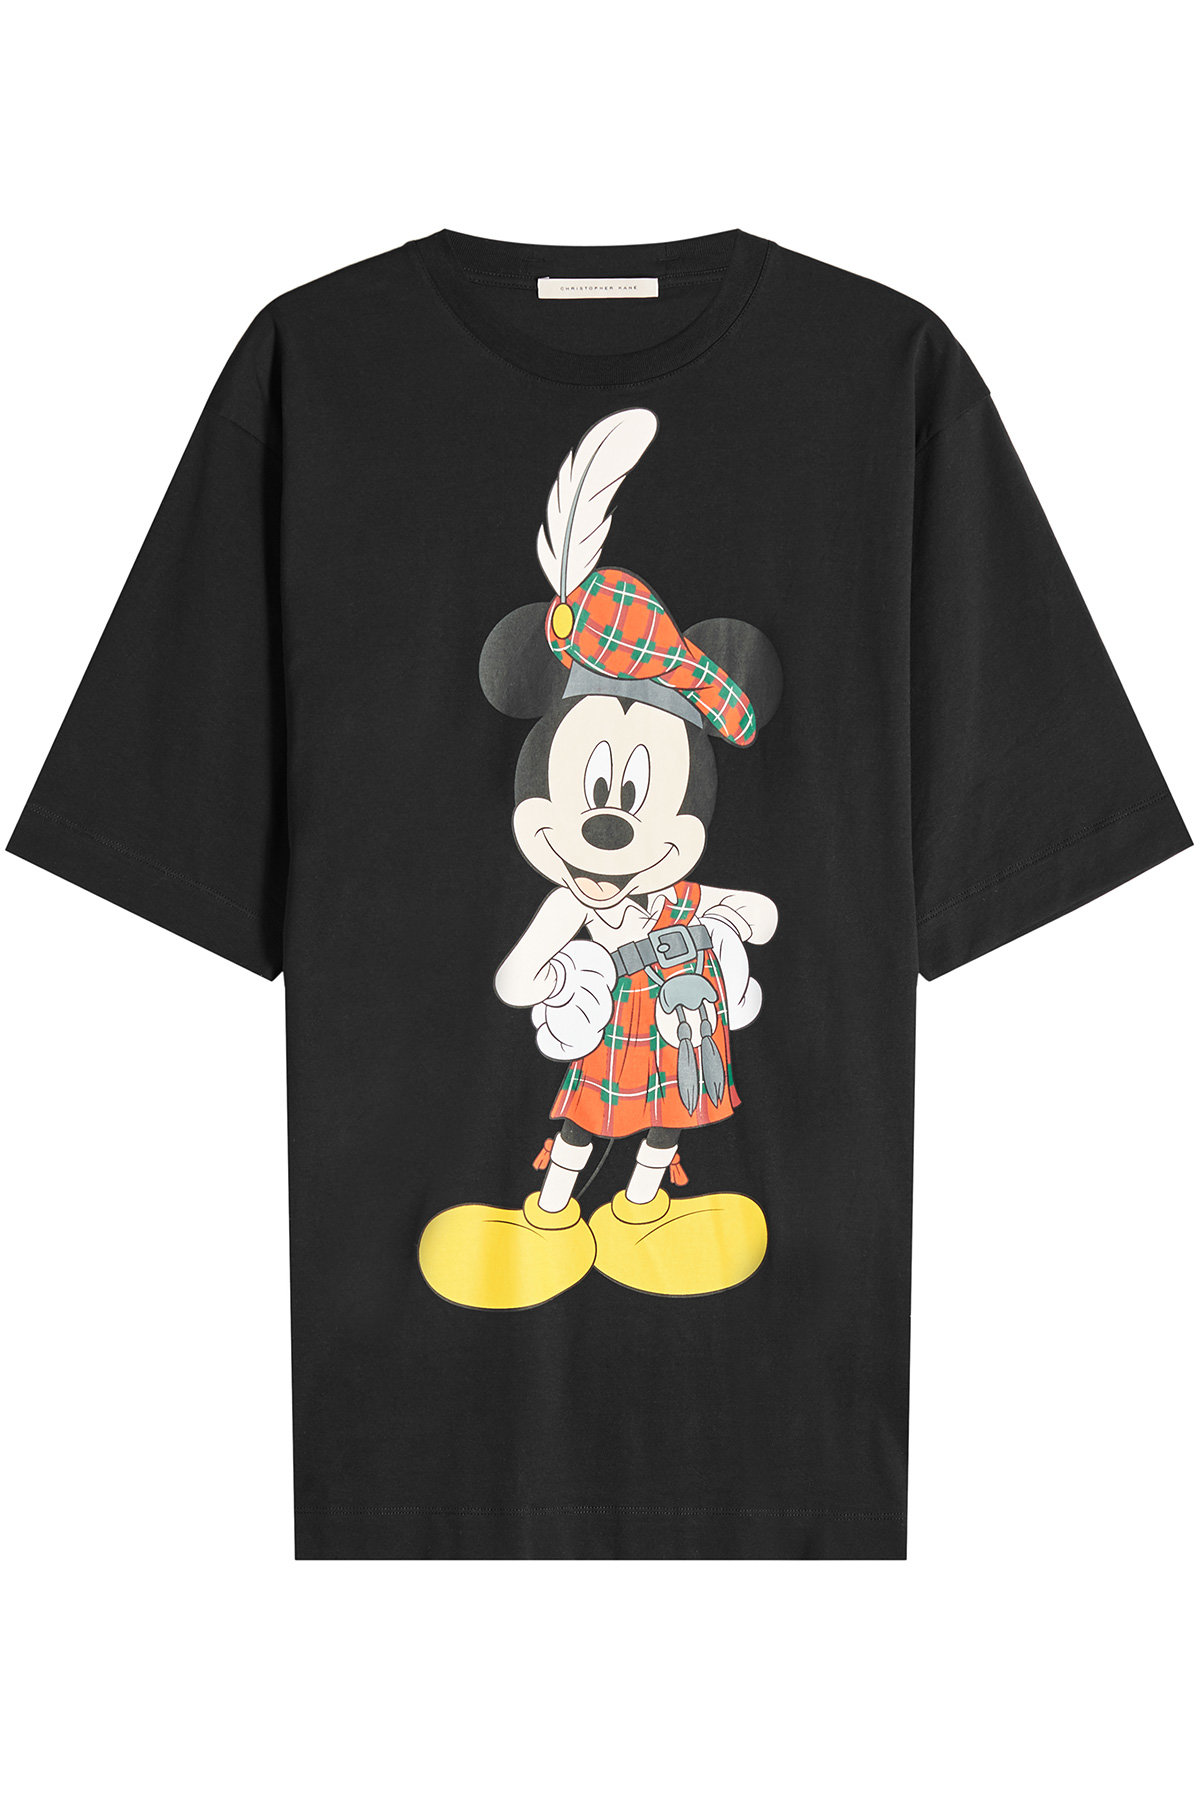 Christopher Kane - Mickey Mouse T-Shirt